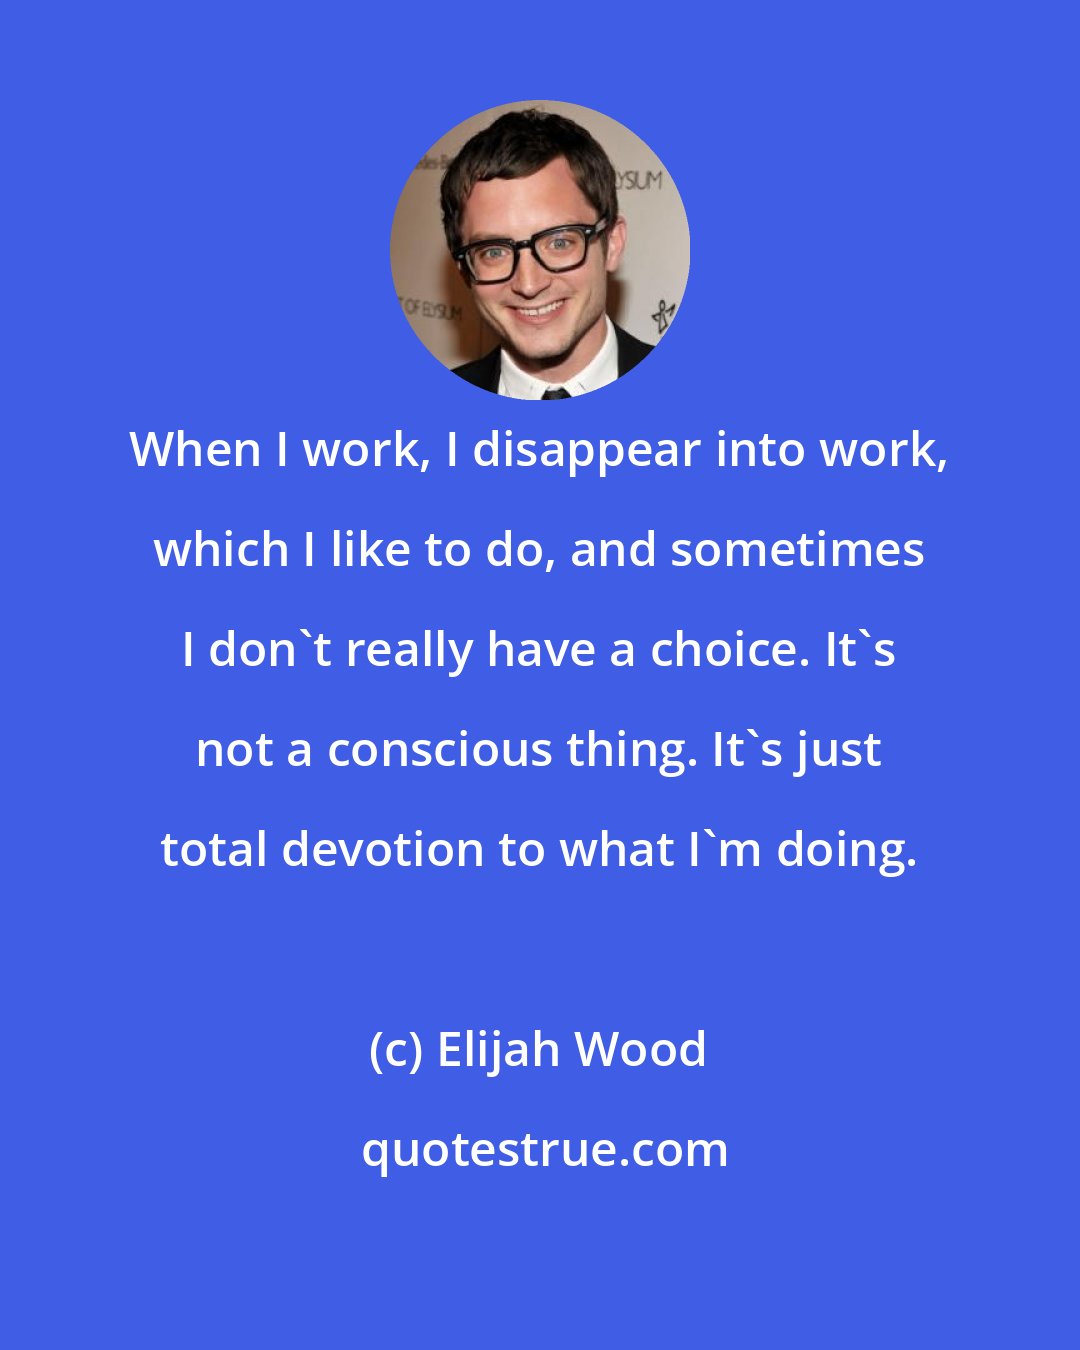 Elijah Wood: When I work, I disappear into work, which I like to do, and sometimes I don't really have a choice. It's not a conscious thing. It's just total devotion to what I'm doing.